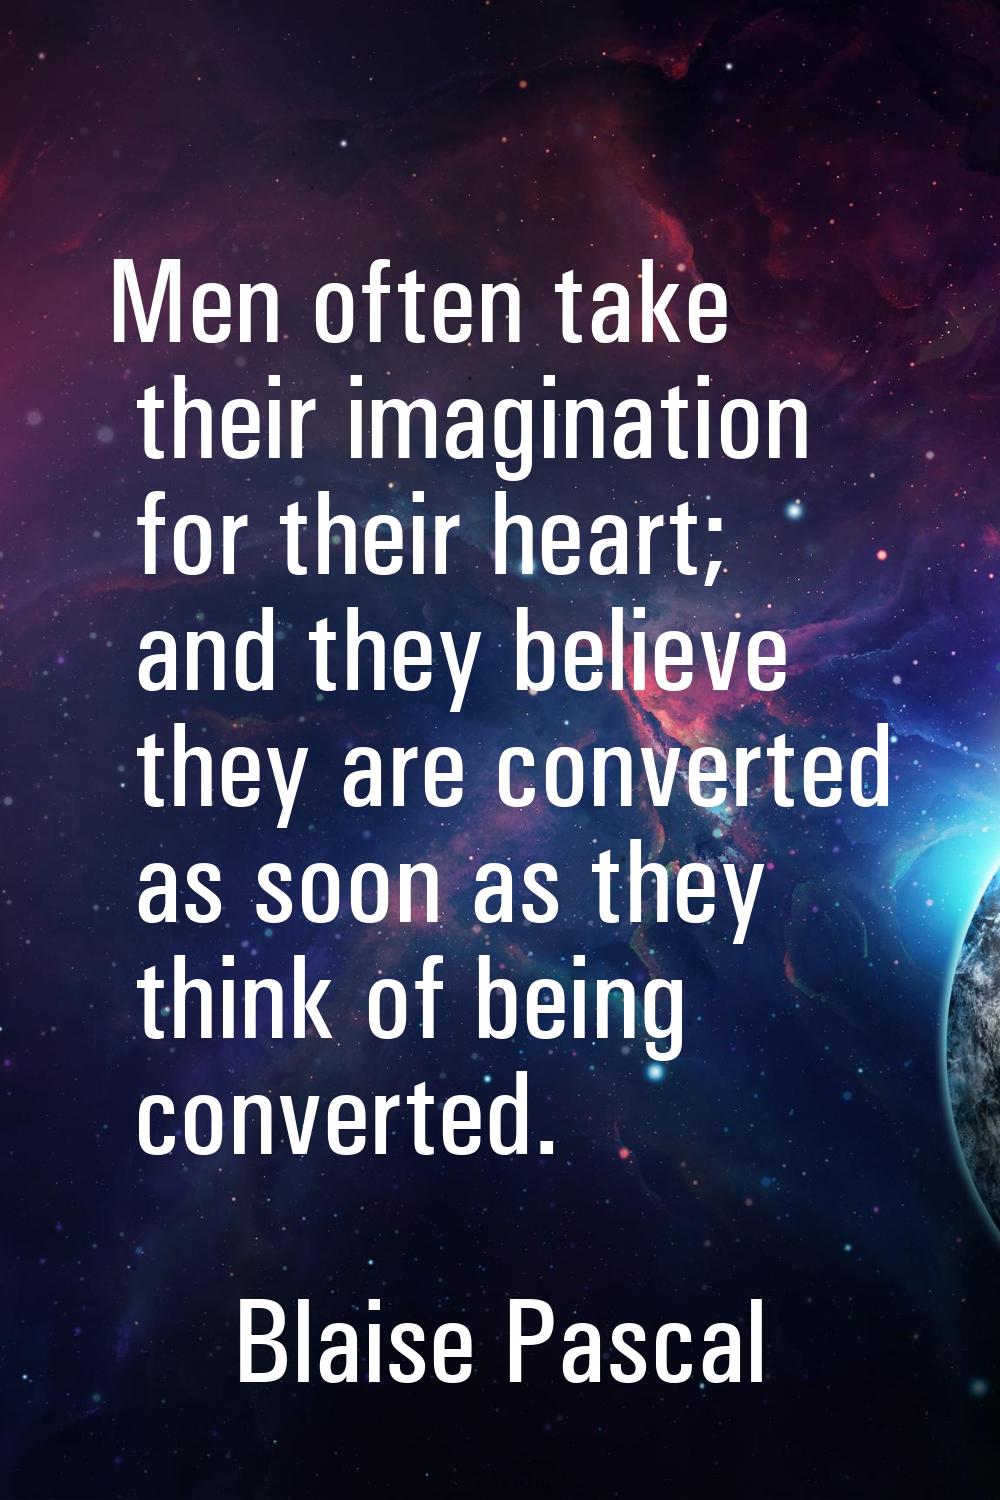 Men often take their imagination for their heart; and they believe they are converted as soon as th